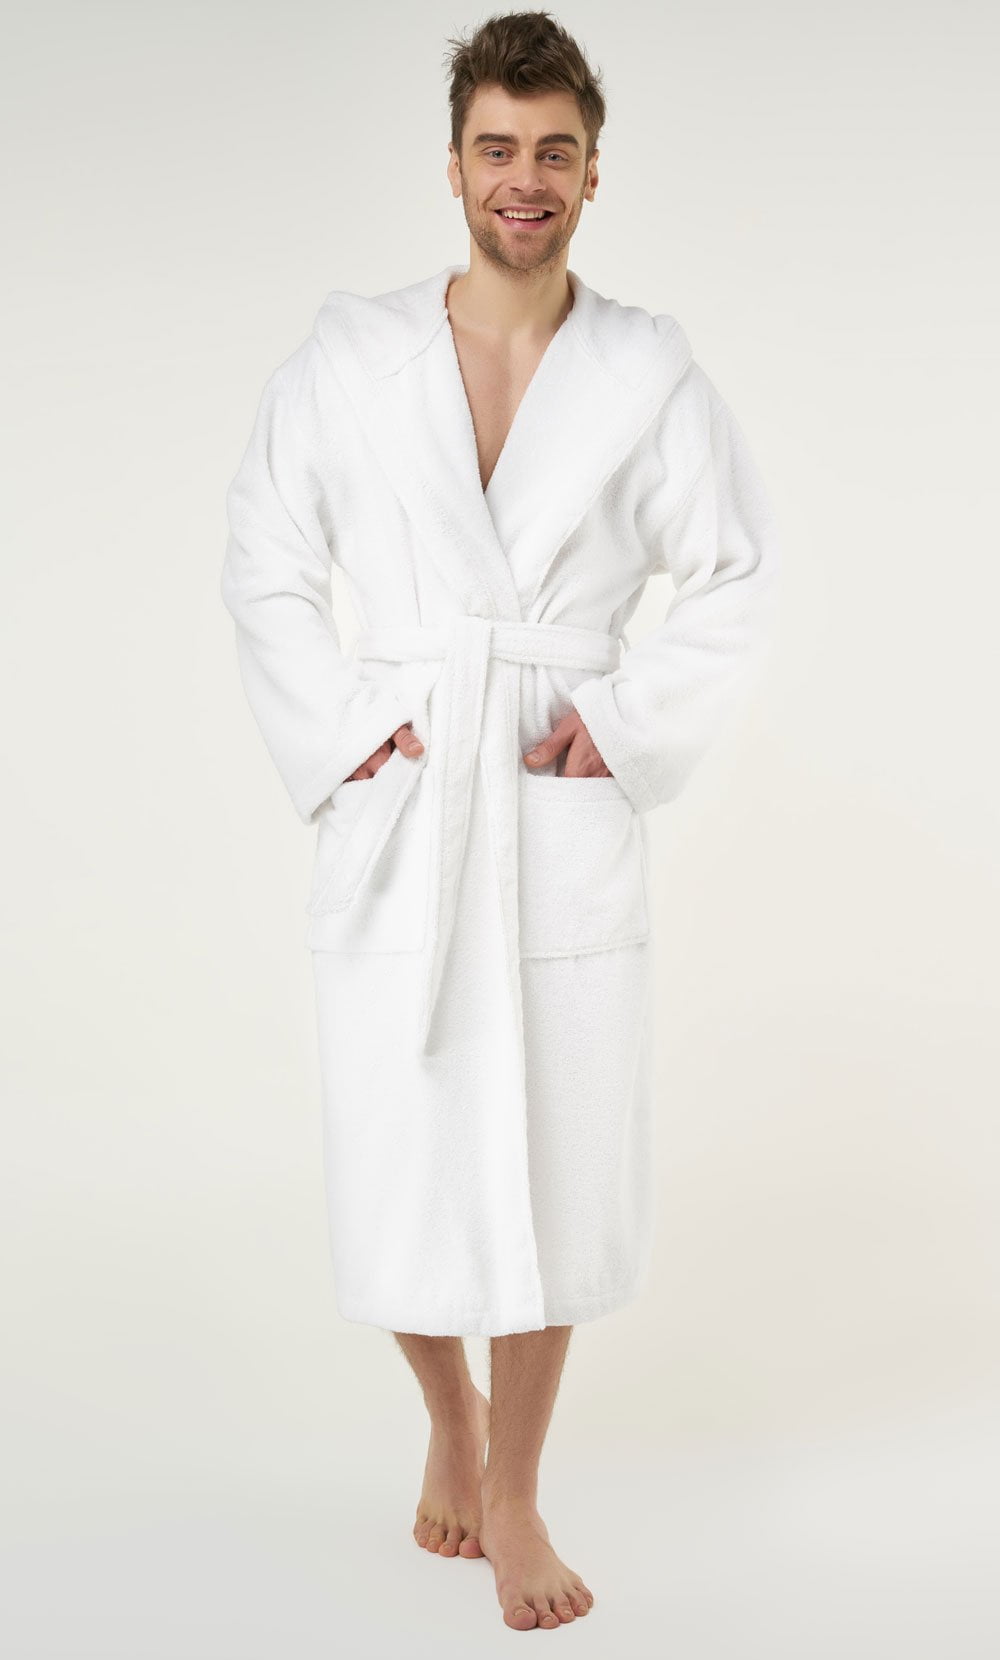 Hooded Bathrobe Full Length for Womens Mens 100% Cotton Terry Towelling Dressing Gown Ankle Length for Spa Gym Hotel Fluffy Comfort Wrap Highly Absorbent House Coat